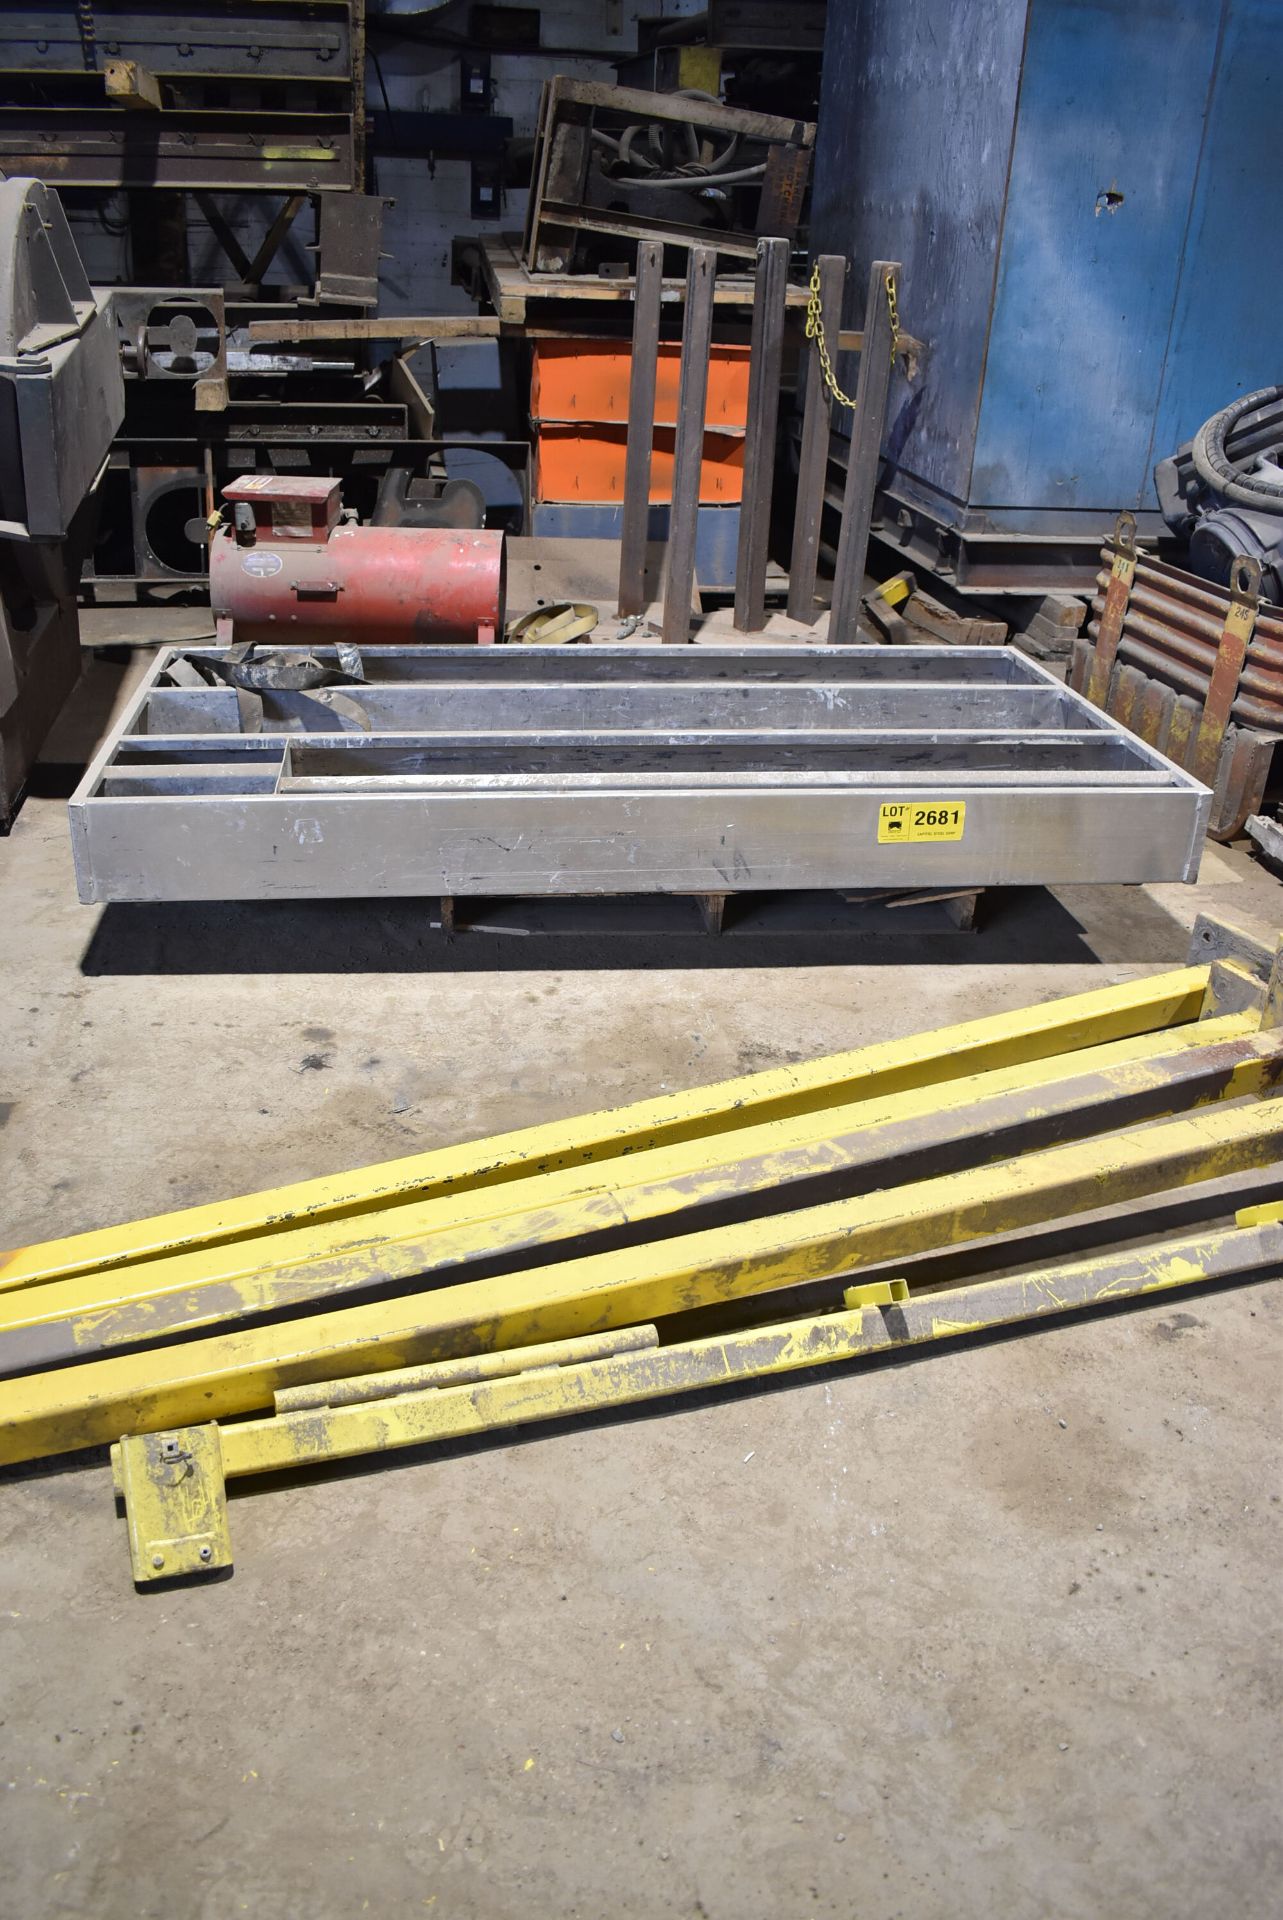 LOT/ SAFETY STANCHIONS, STORAGE BOX, SHOP HEATER, PIGEON HOLE CABINETS, SURPLUS EQUIPMENT [RIGGING